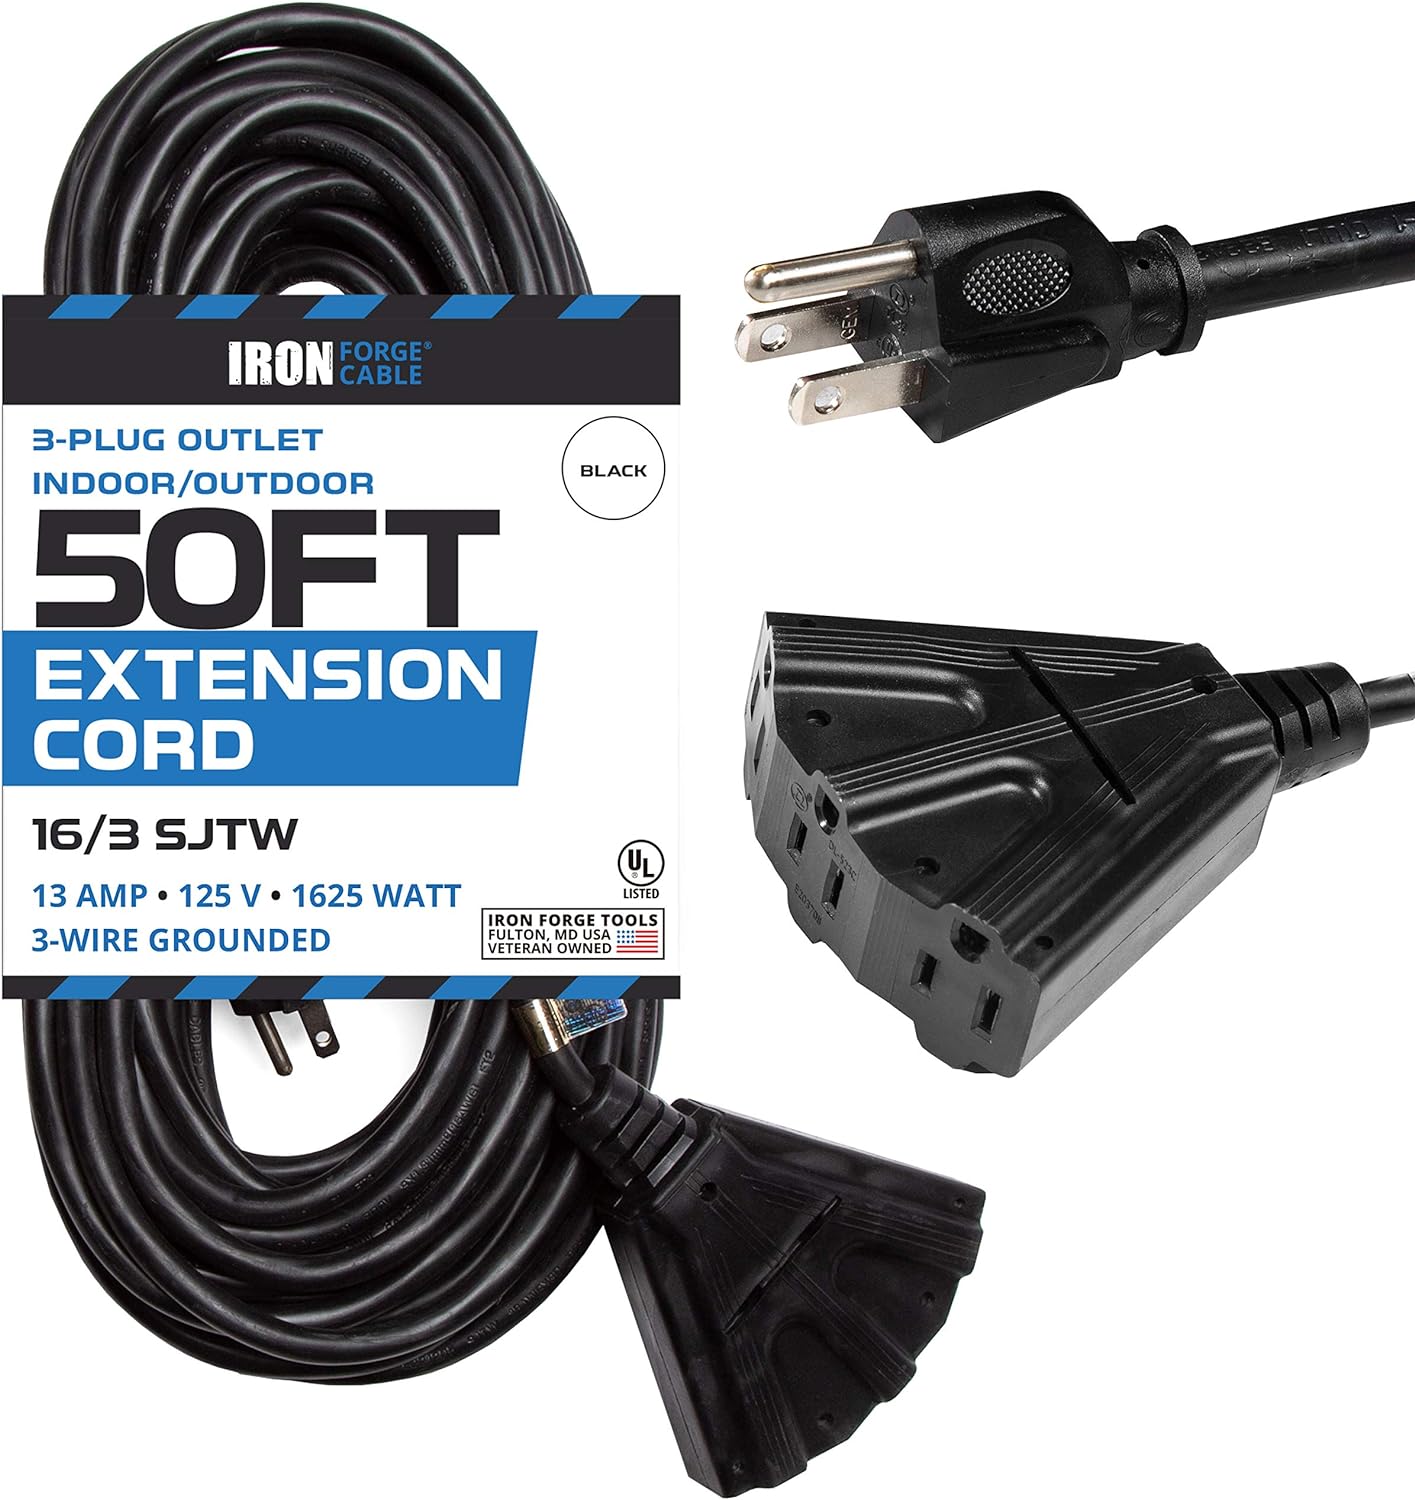 Iron Forge Cable 50 Ft Outdoor Extension Cord with 3 Electrical Power Outlets - 16/3 SJTW Durable Black Cable